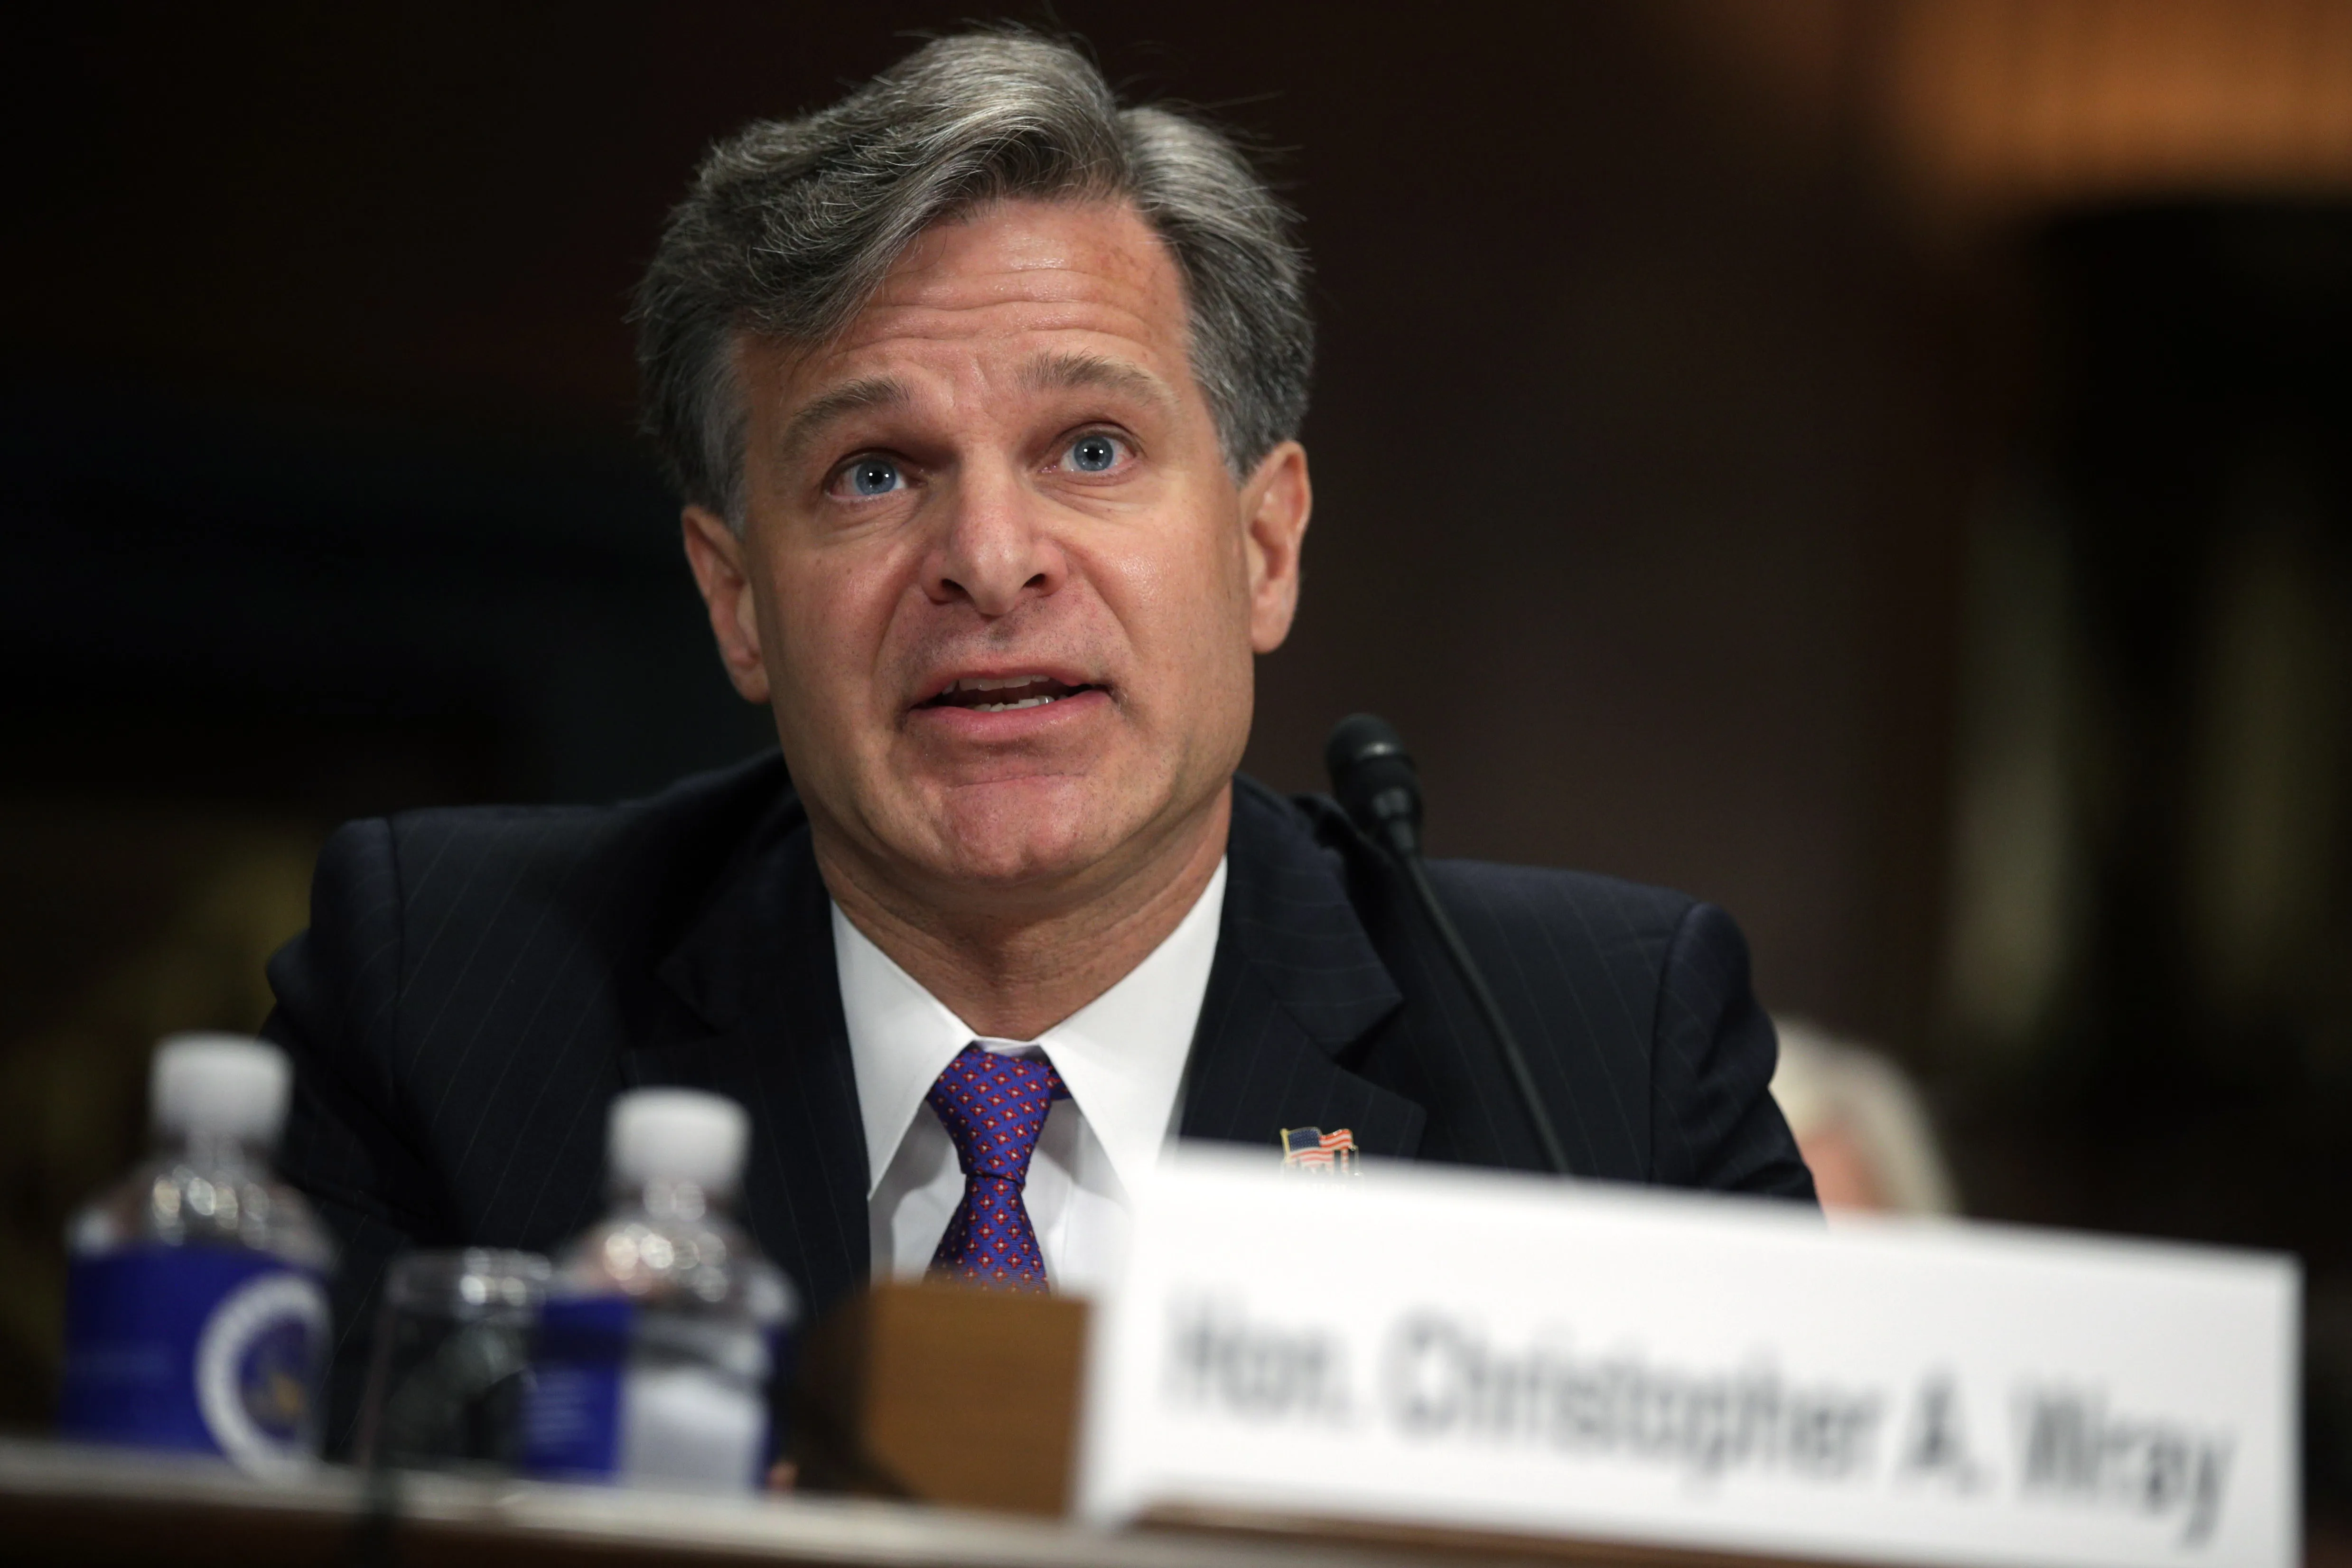 Christopher Wray at his confirmation hearing on July 12, 2017.?w=200&h=150